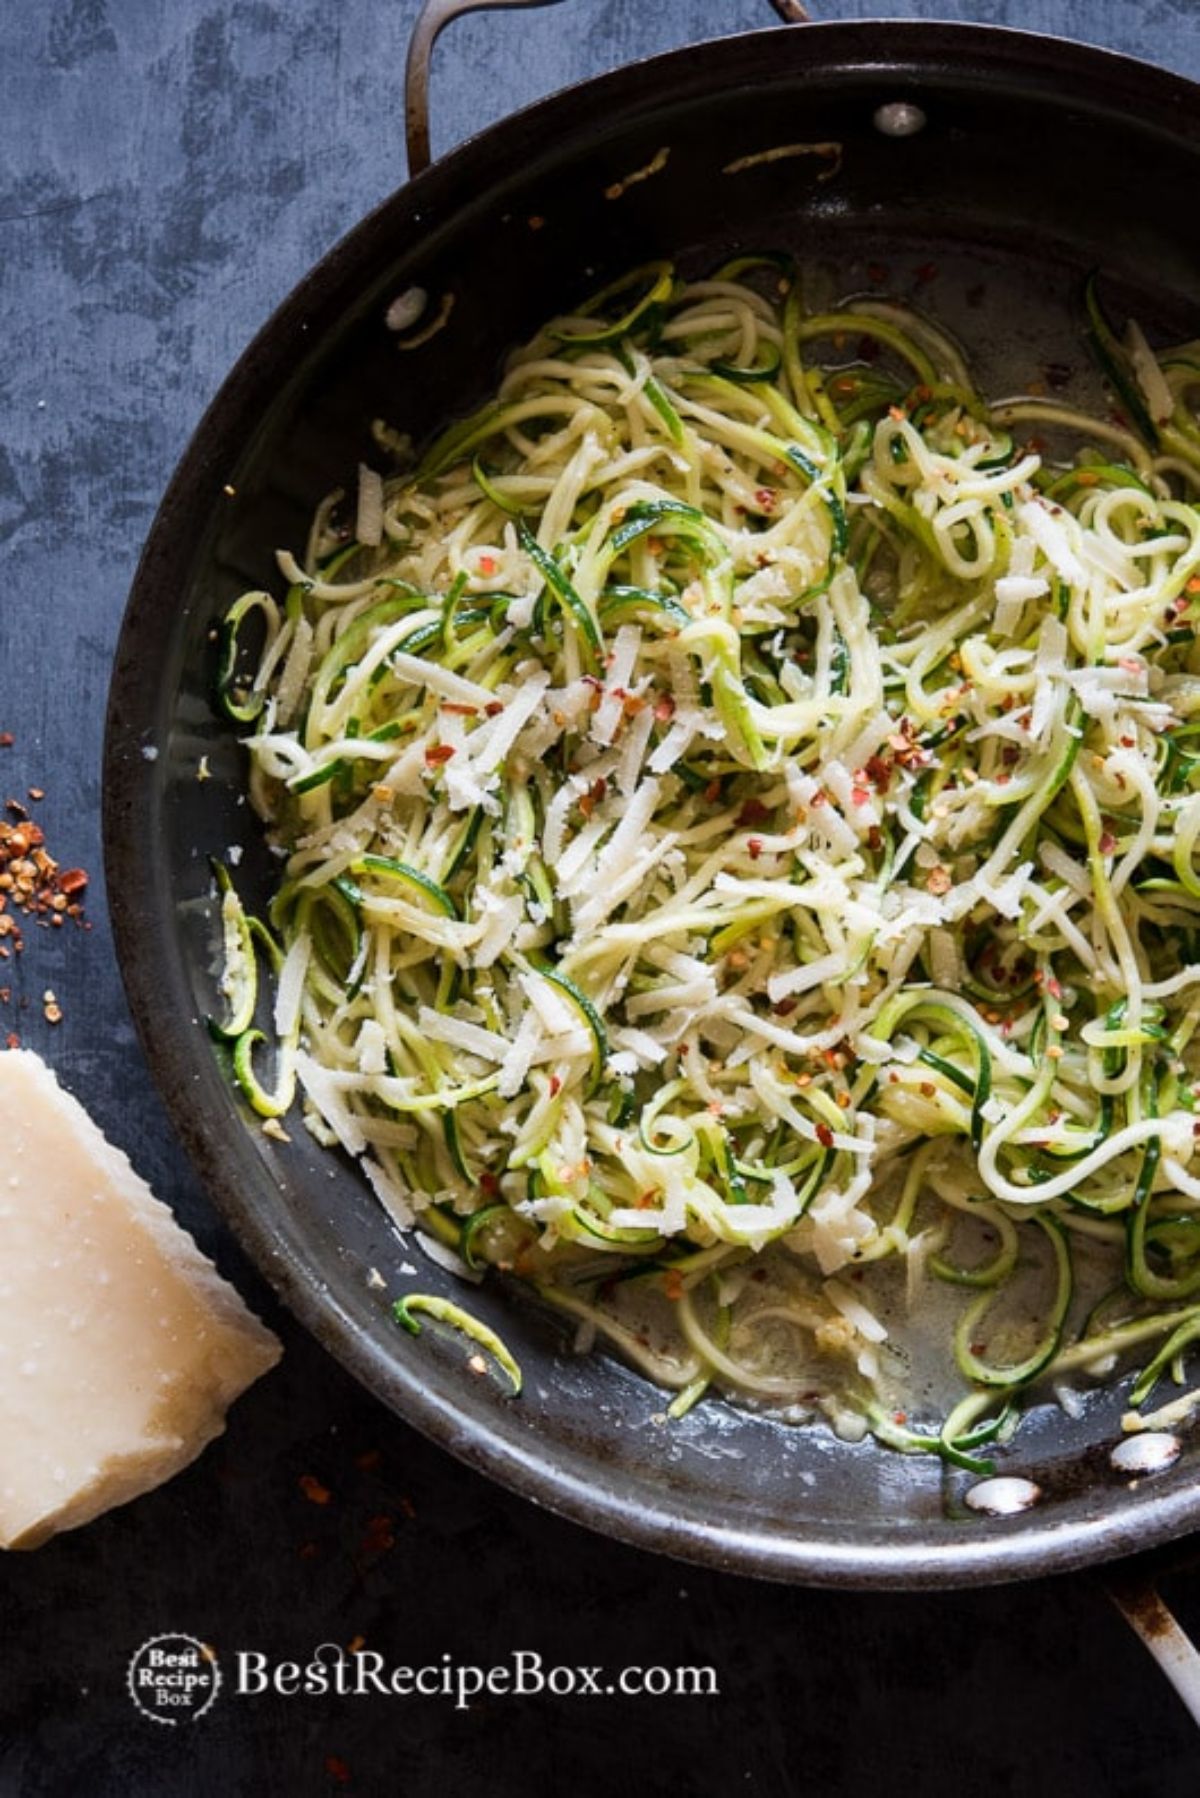 On a blue surface is a wok filled with Zucchini noodles